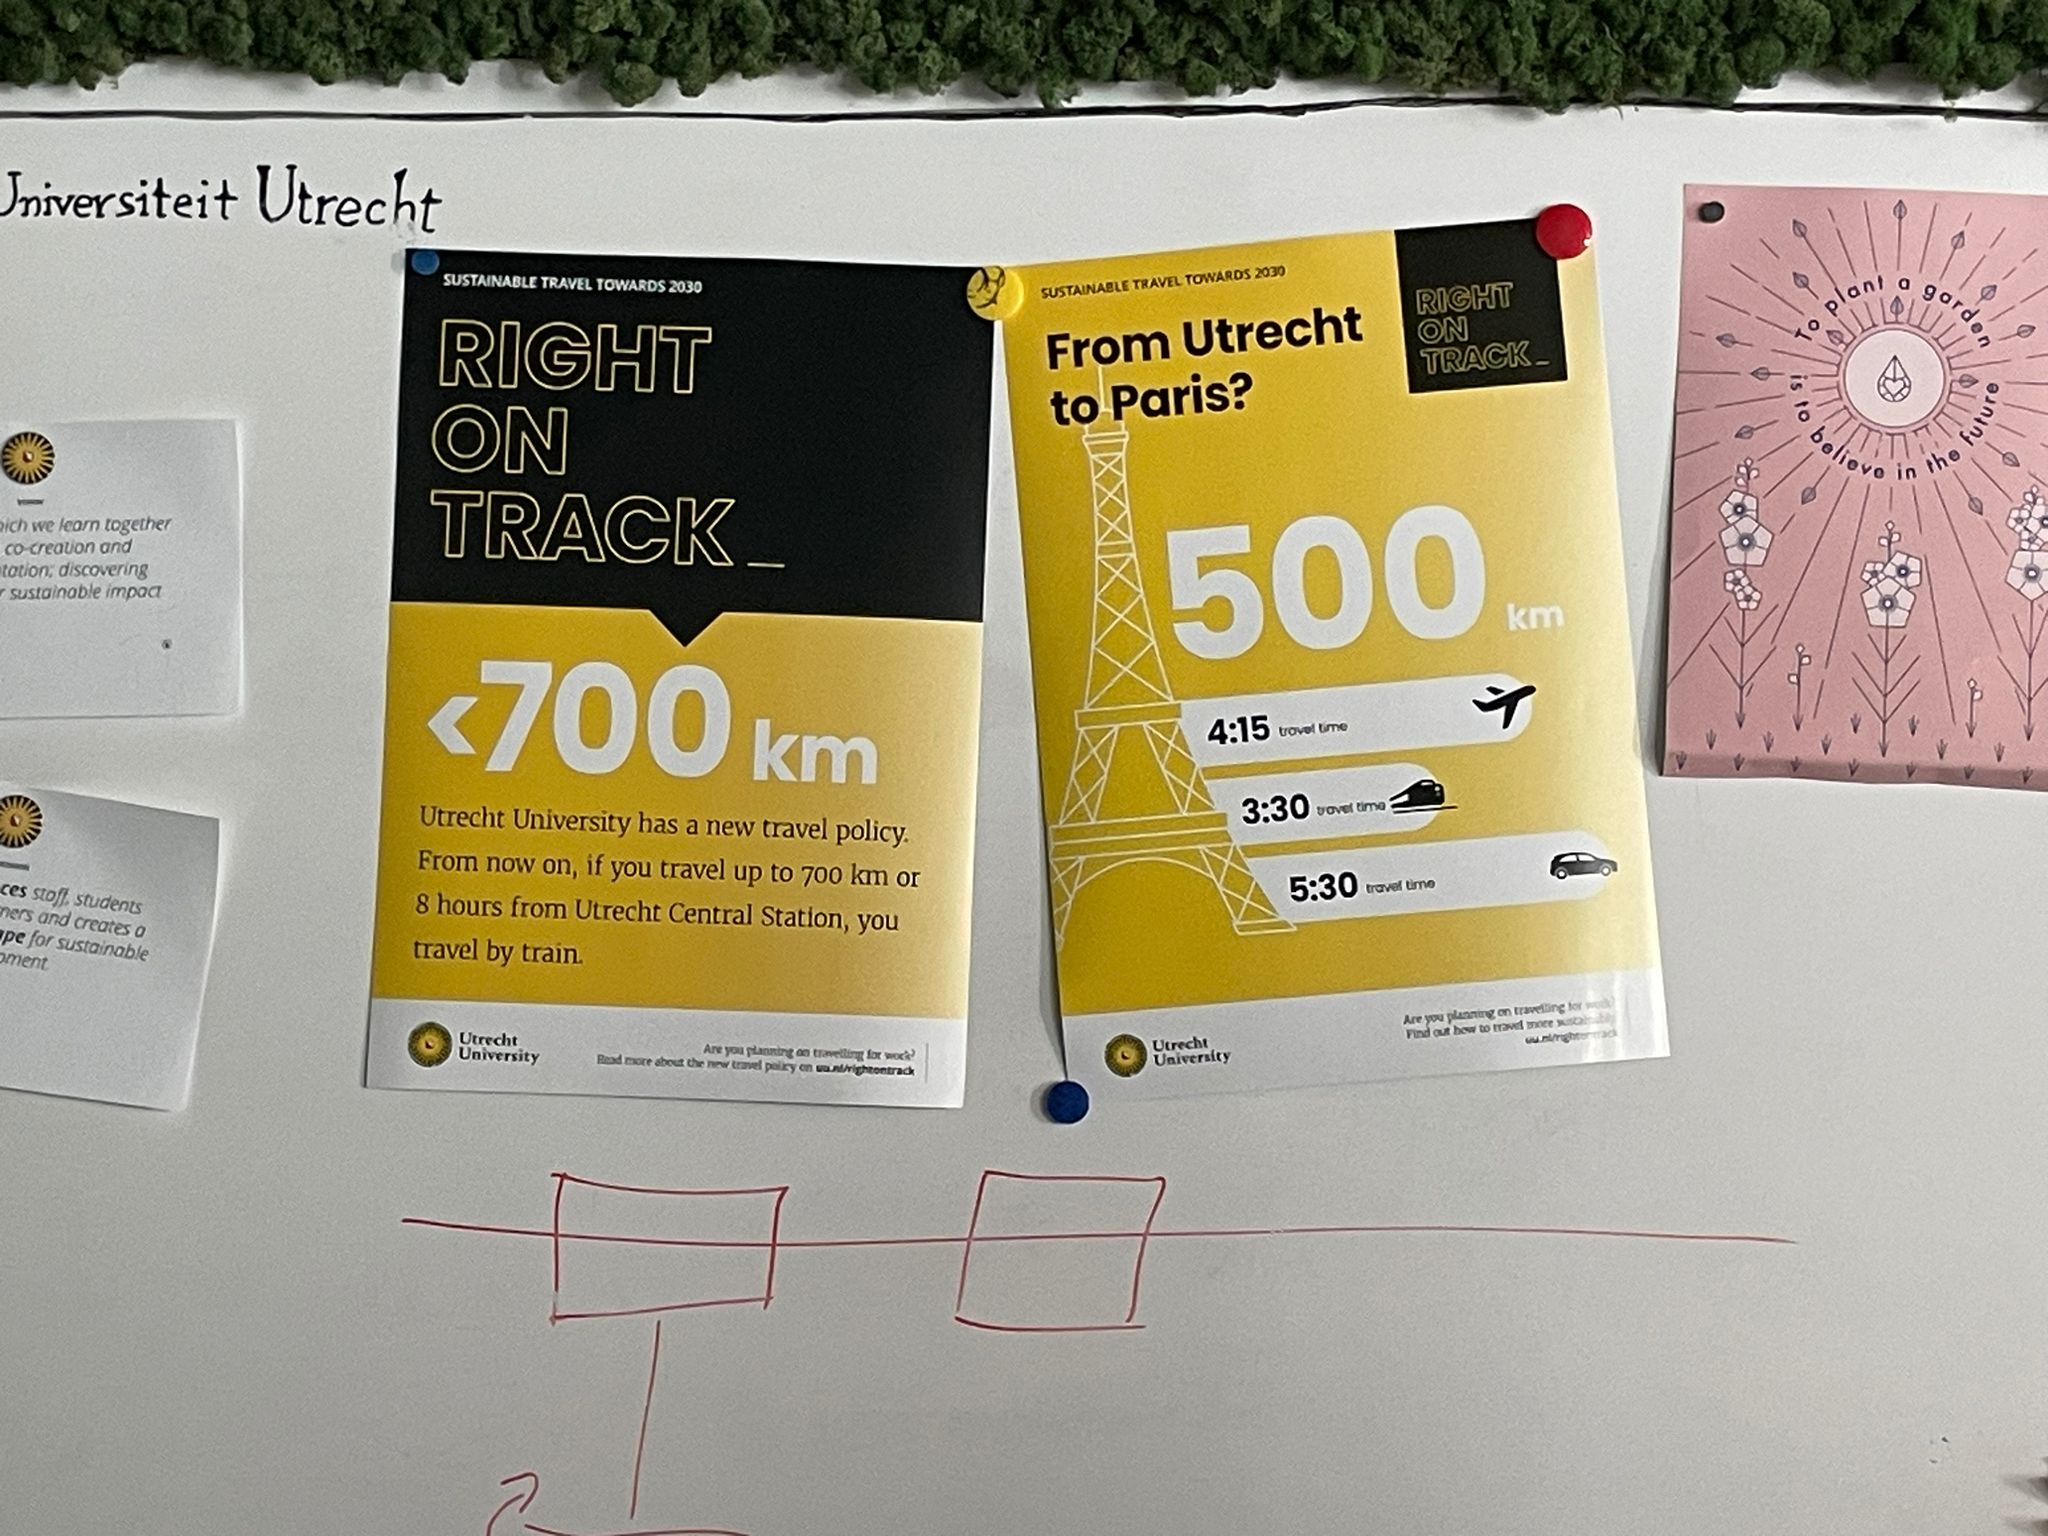 Info posters on the business travel guidelines, which stipulate that up to 8 hours of travel time or up to 700 kilometres distance, the train must always be used.